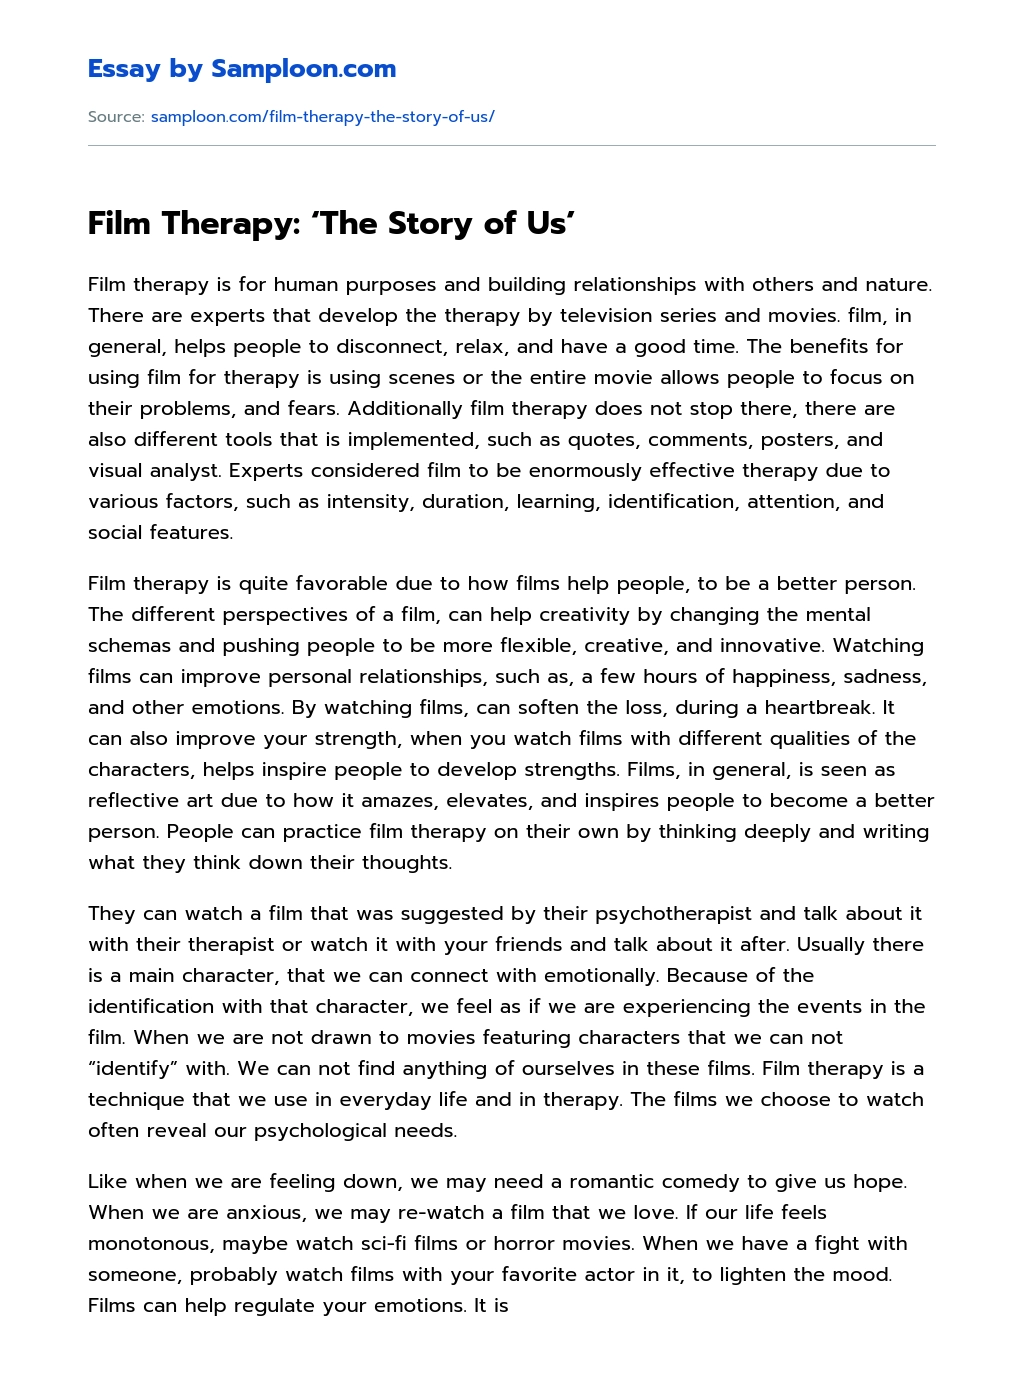 Film Therapy: ‘The Story of Us’ Analytical Essay essay